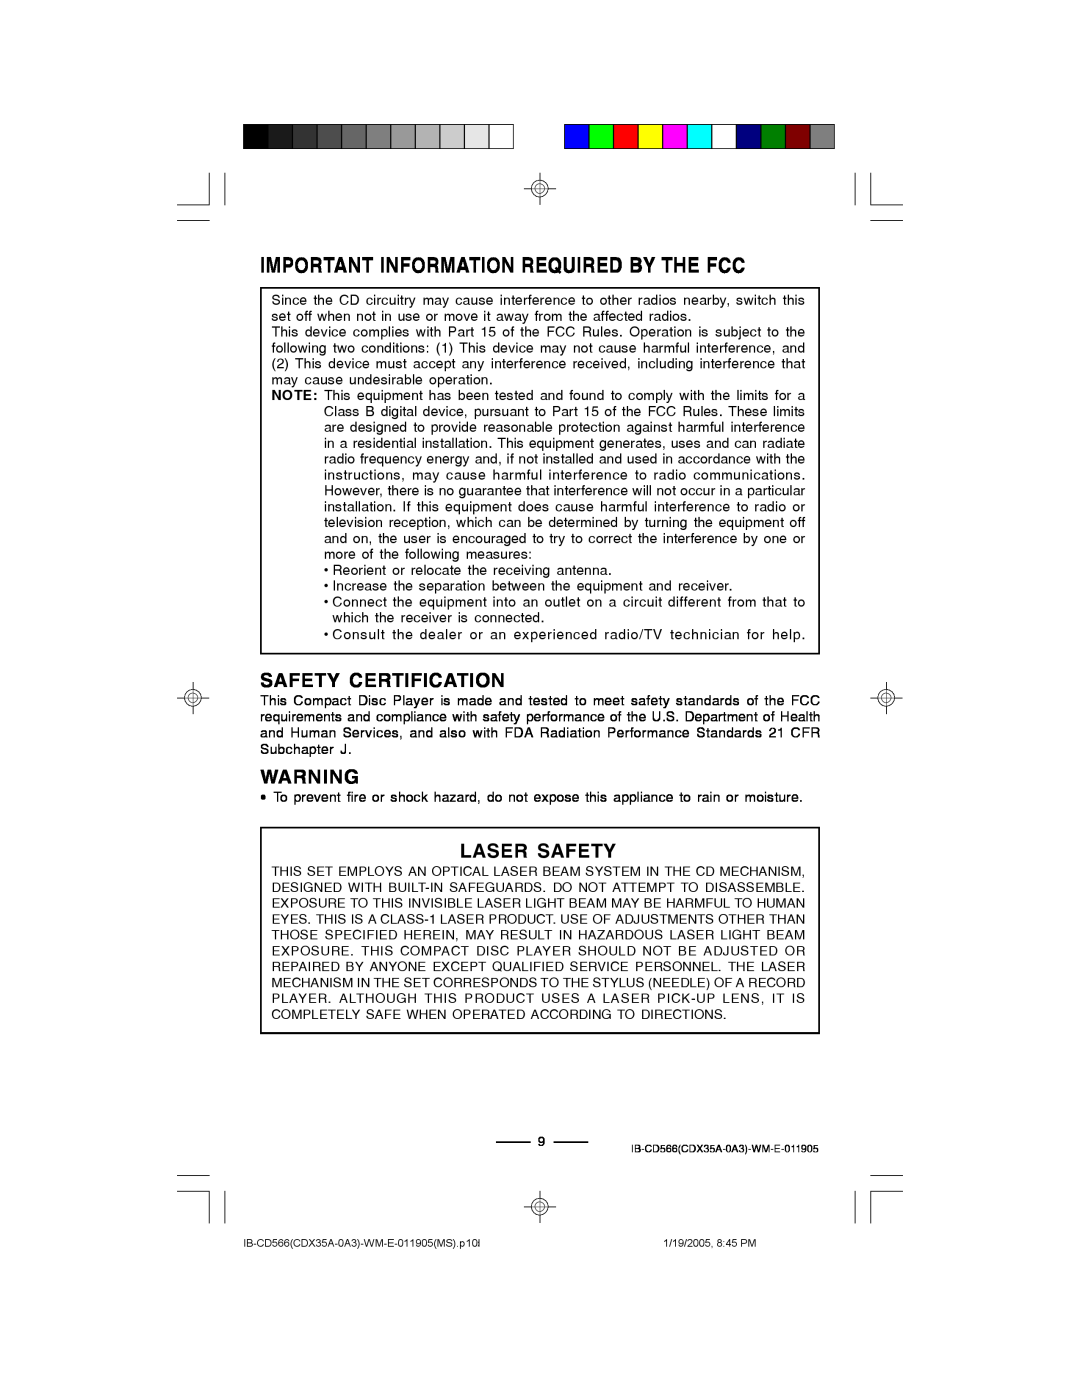 Lenoxx Electronics CD-566 manual Important Information Required By The Fcc, Safety Certification, Laser Safety 